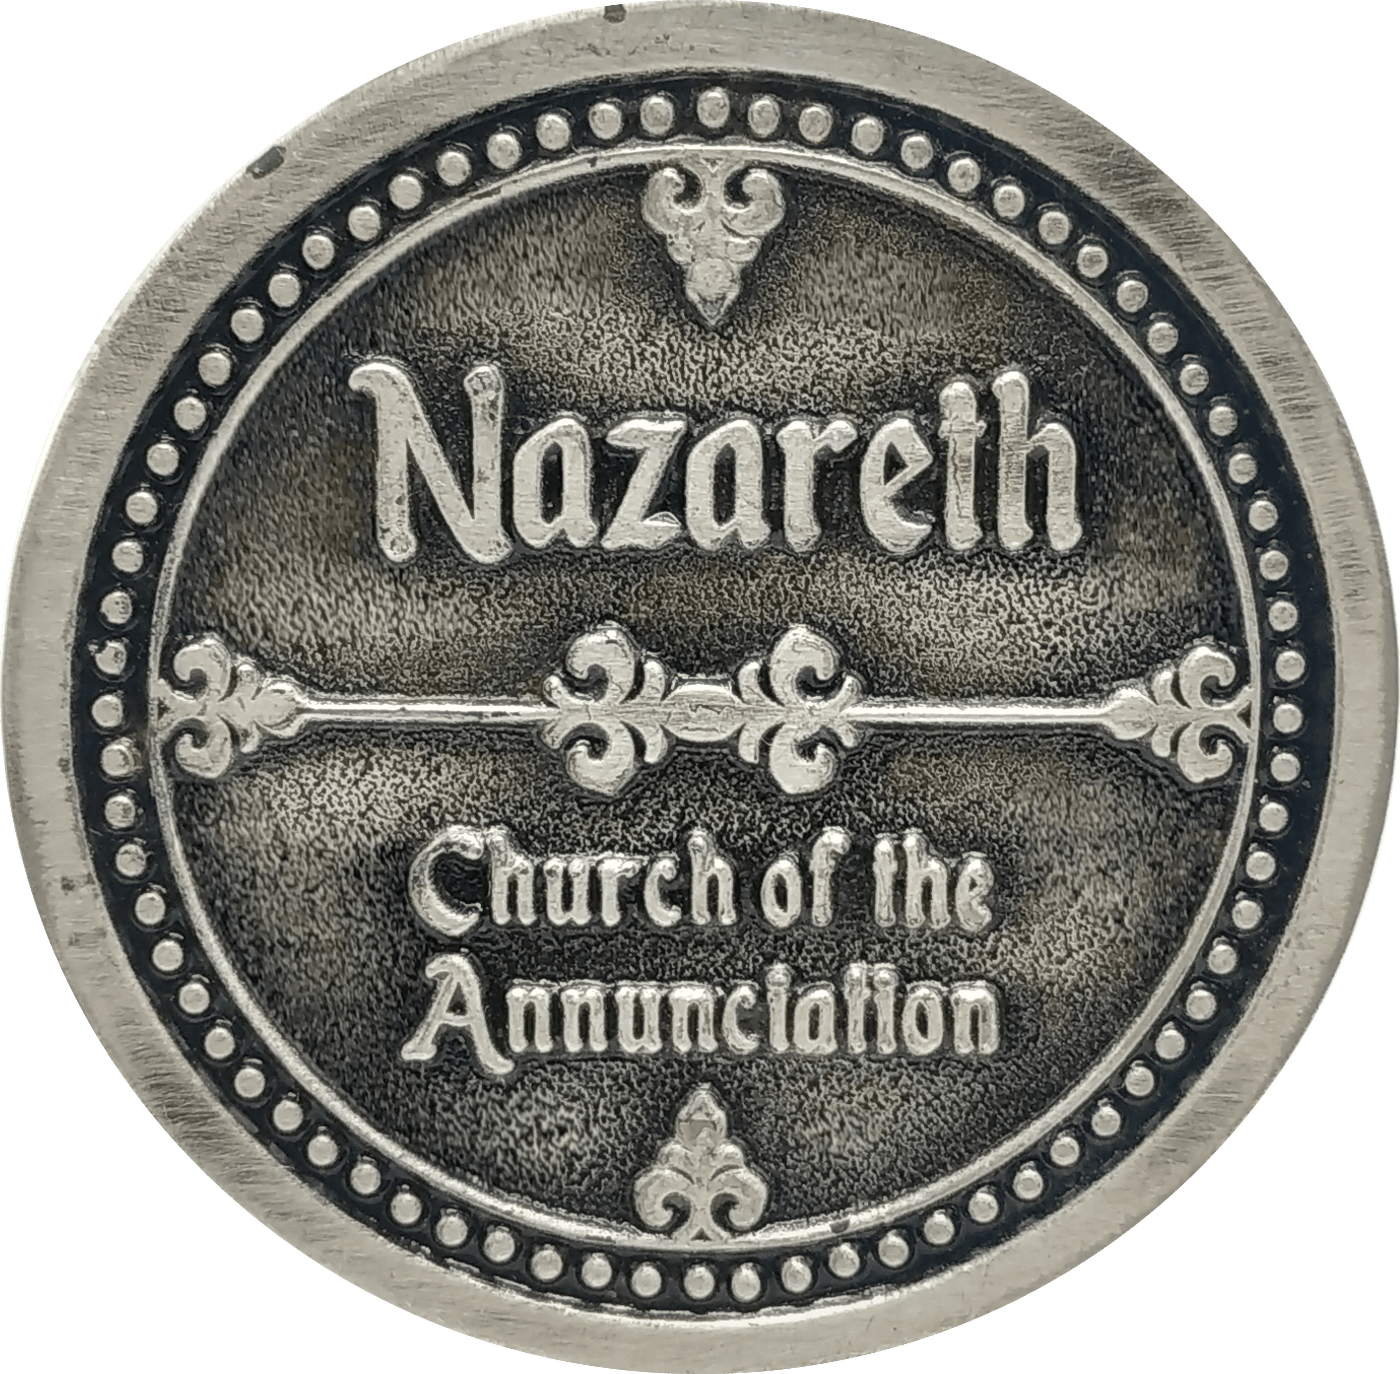 Nazareth Church of Annunciation Coin Israel Souvenir from The Holyland (Silver) - Spring Nahal